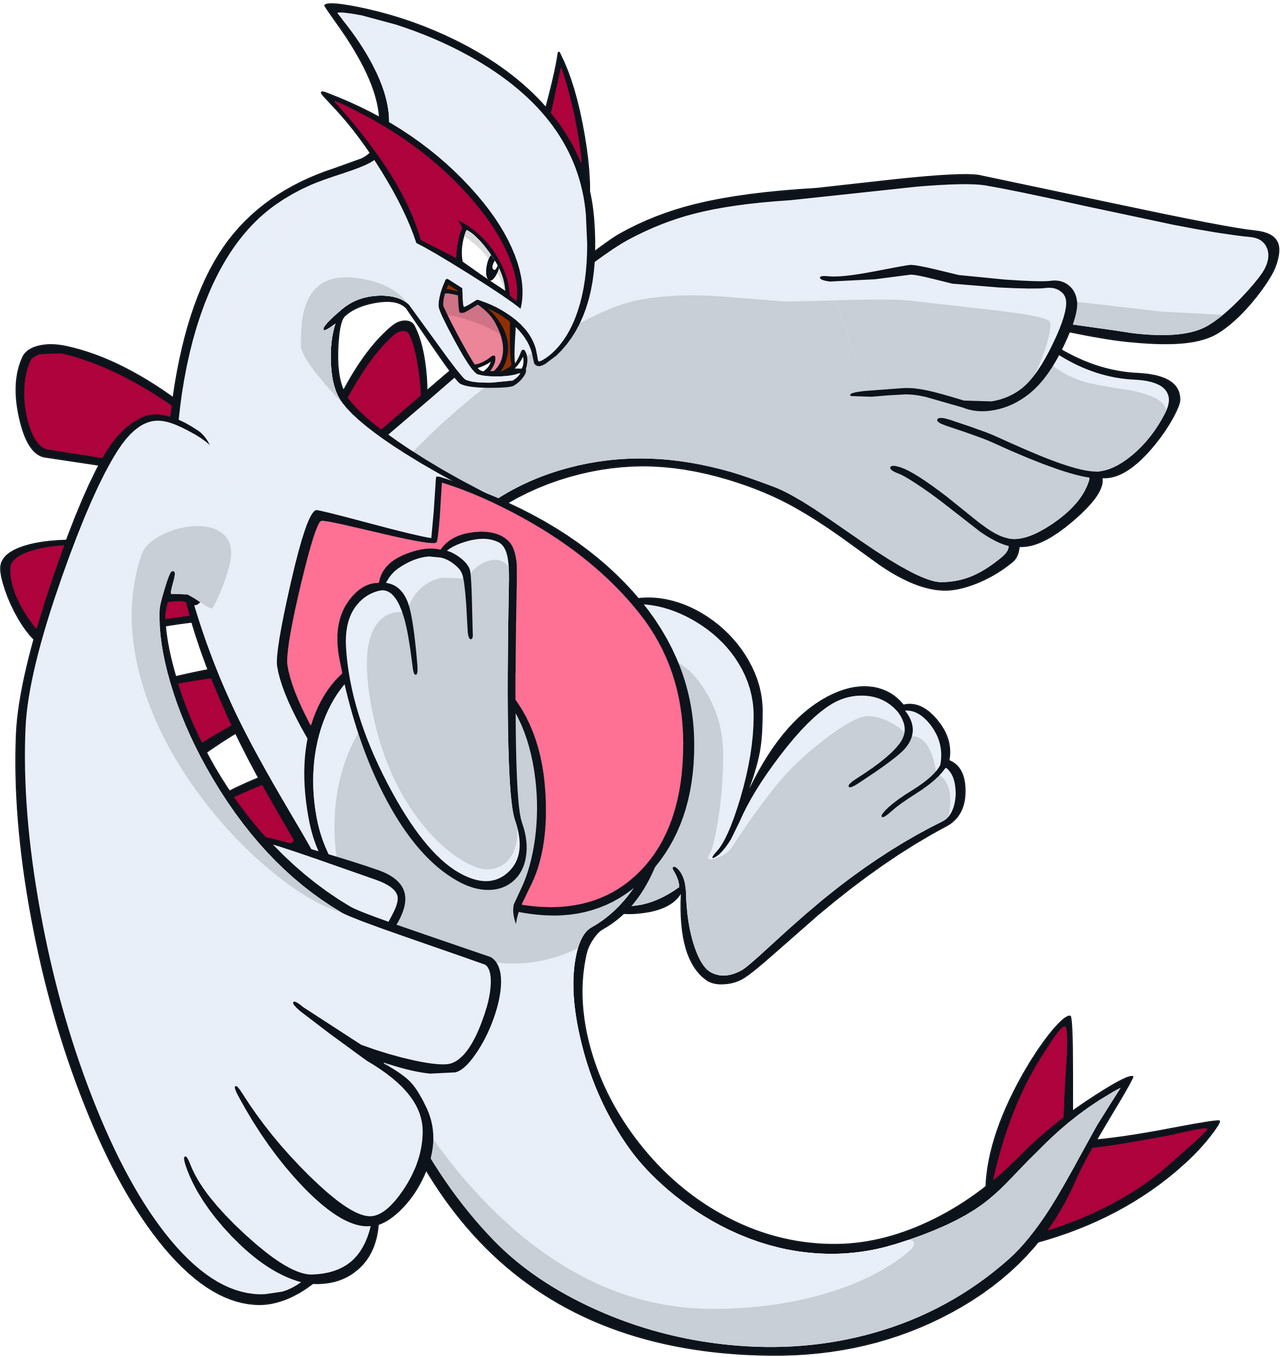 Shiny Lugia And Shiny Mew by CrystalTheLuxio on DeviantArt